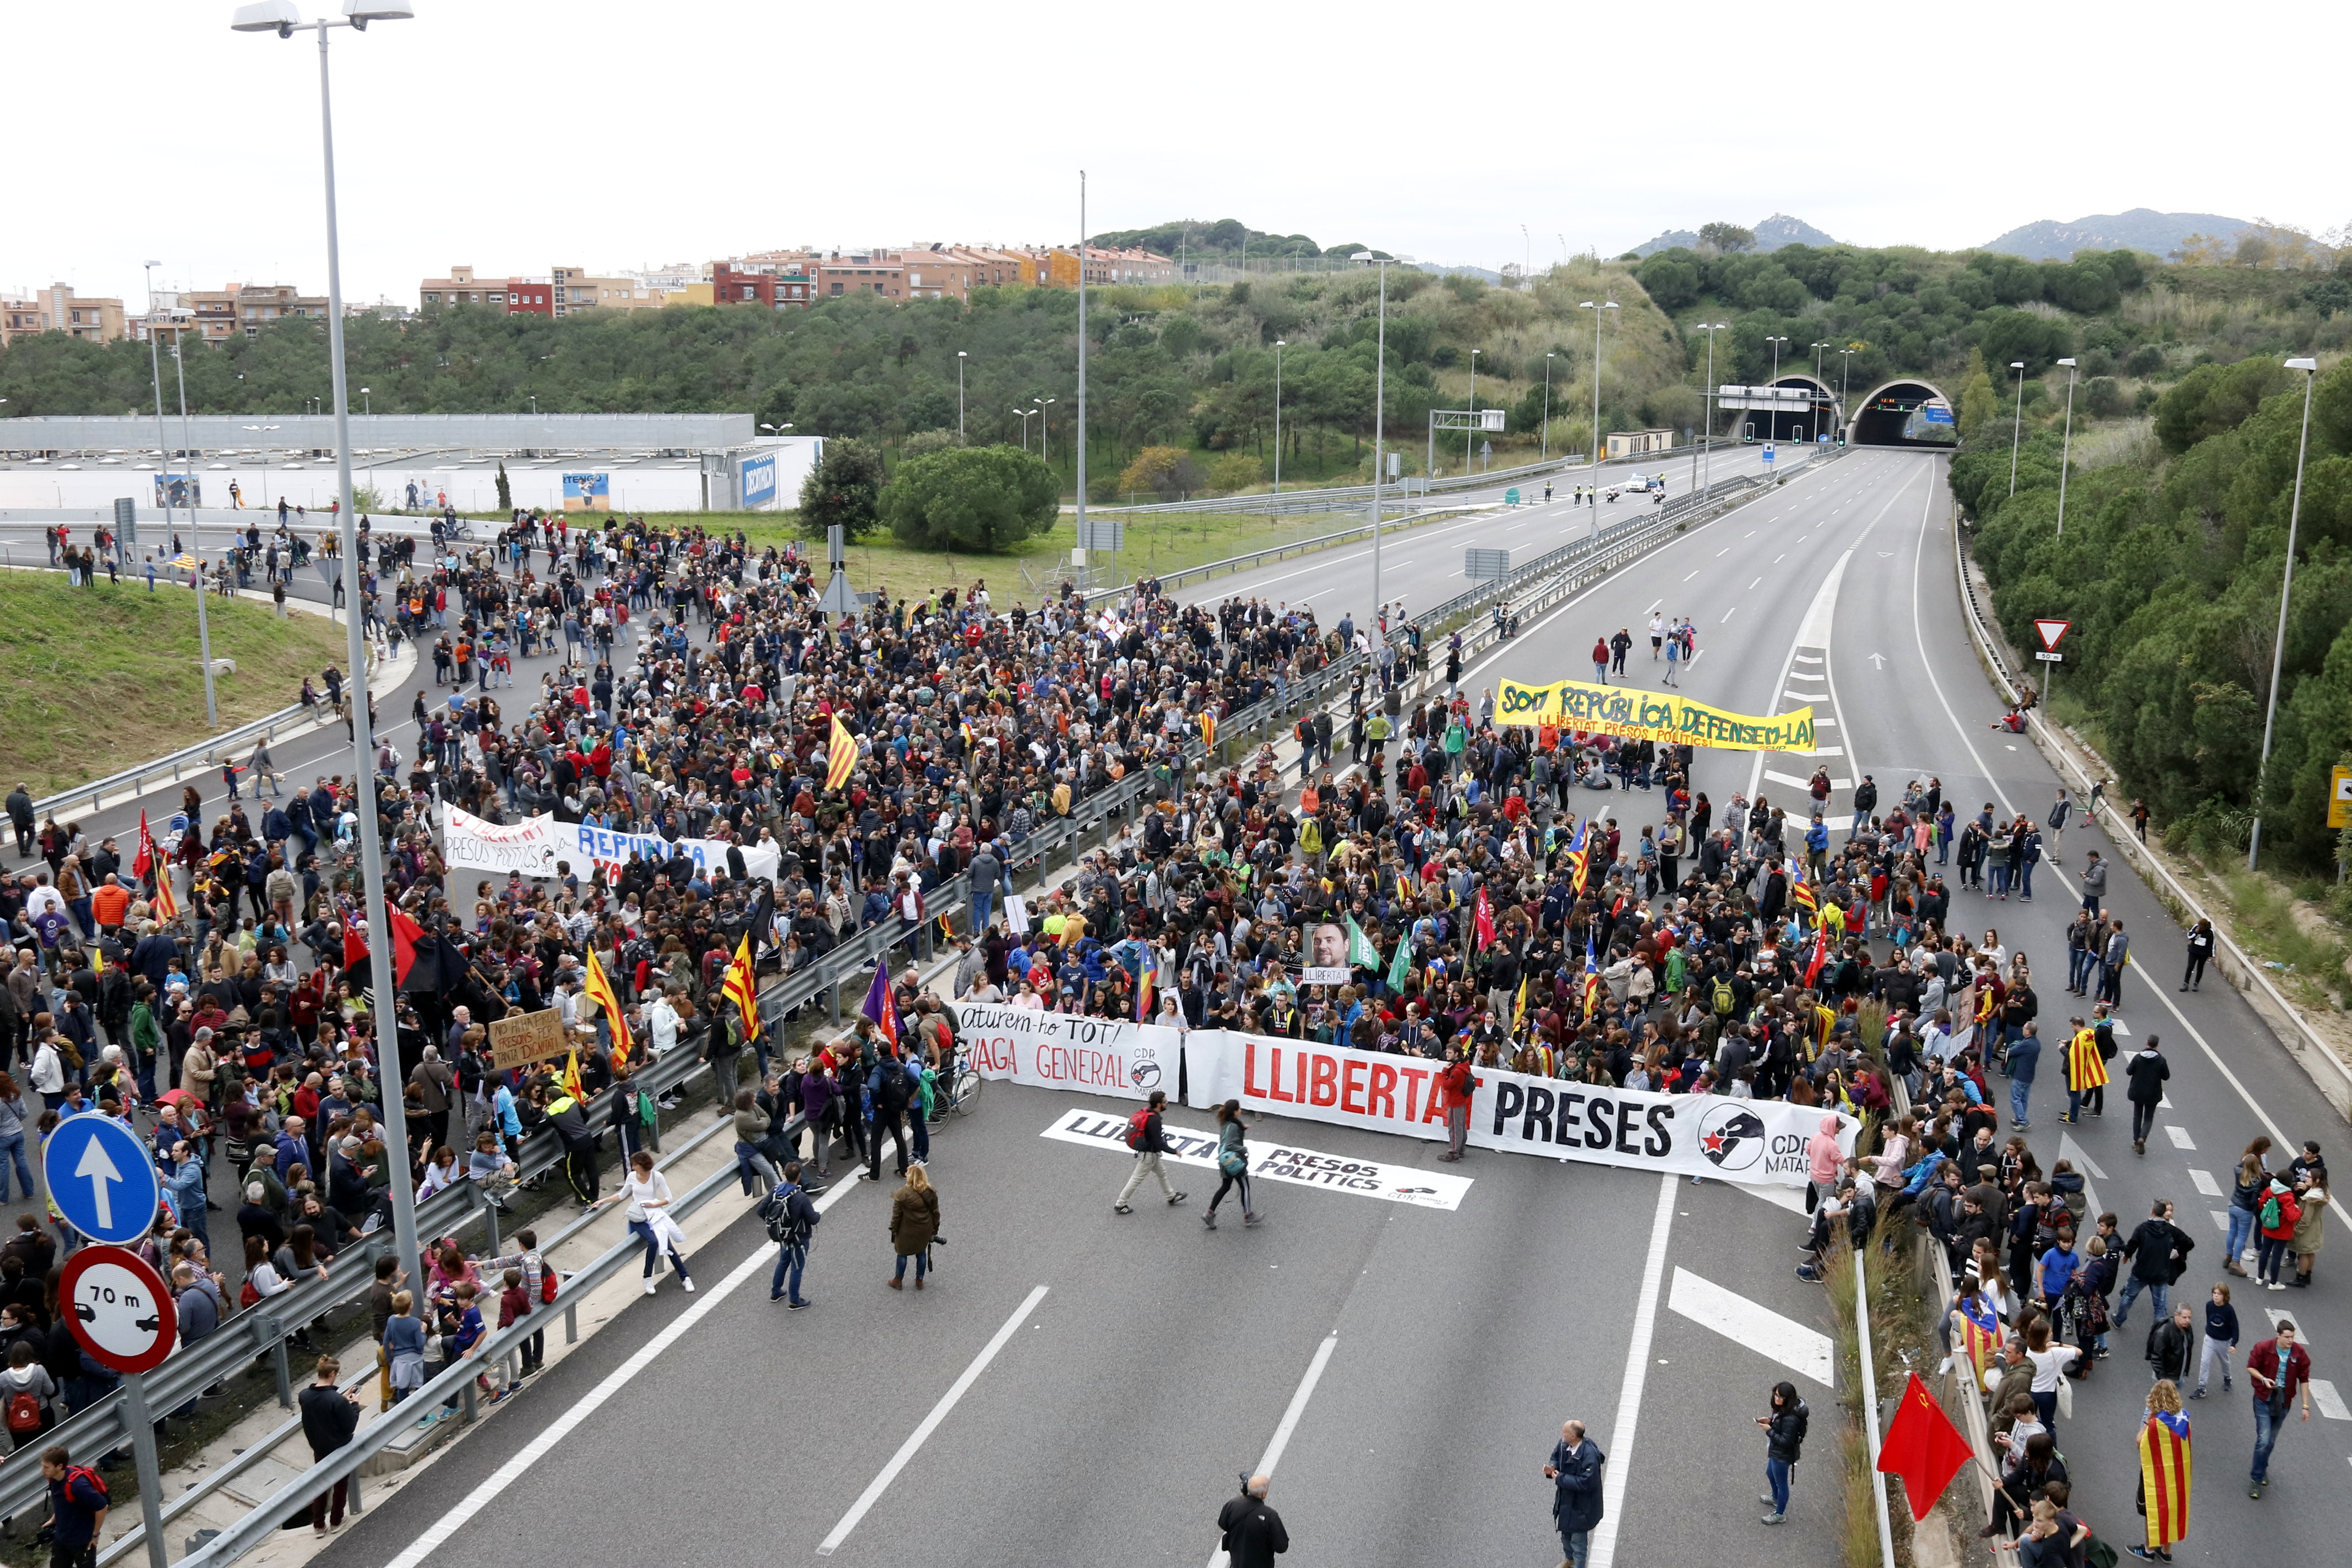 C-32 in Mataró blocked by protesters (by Jordi Pujolar)